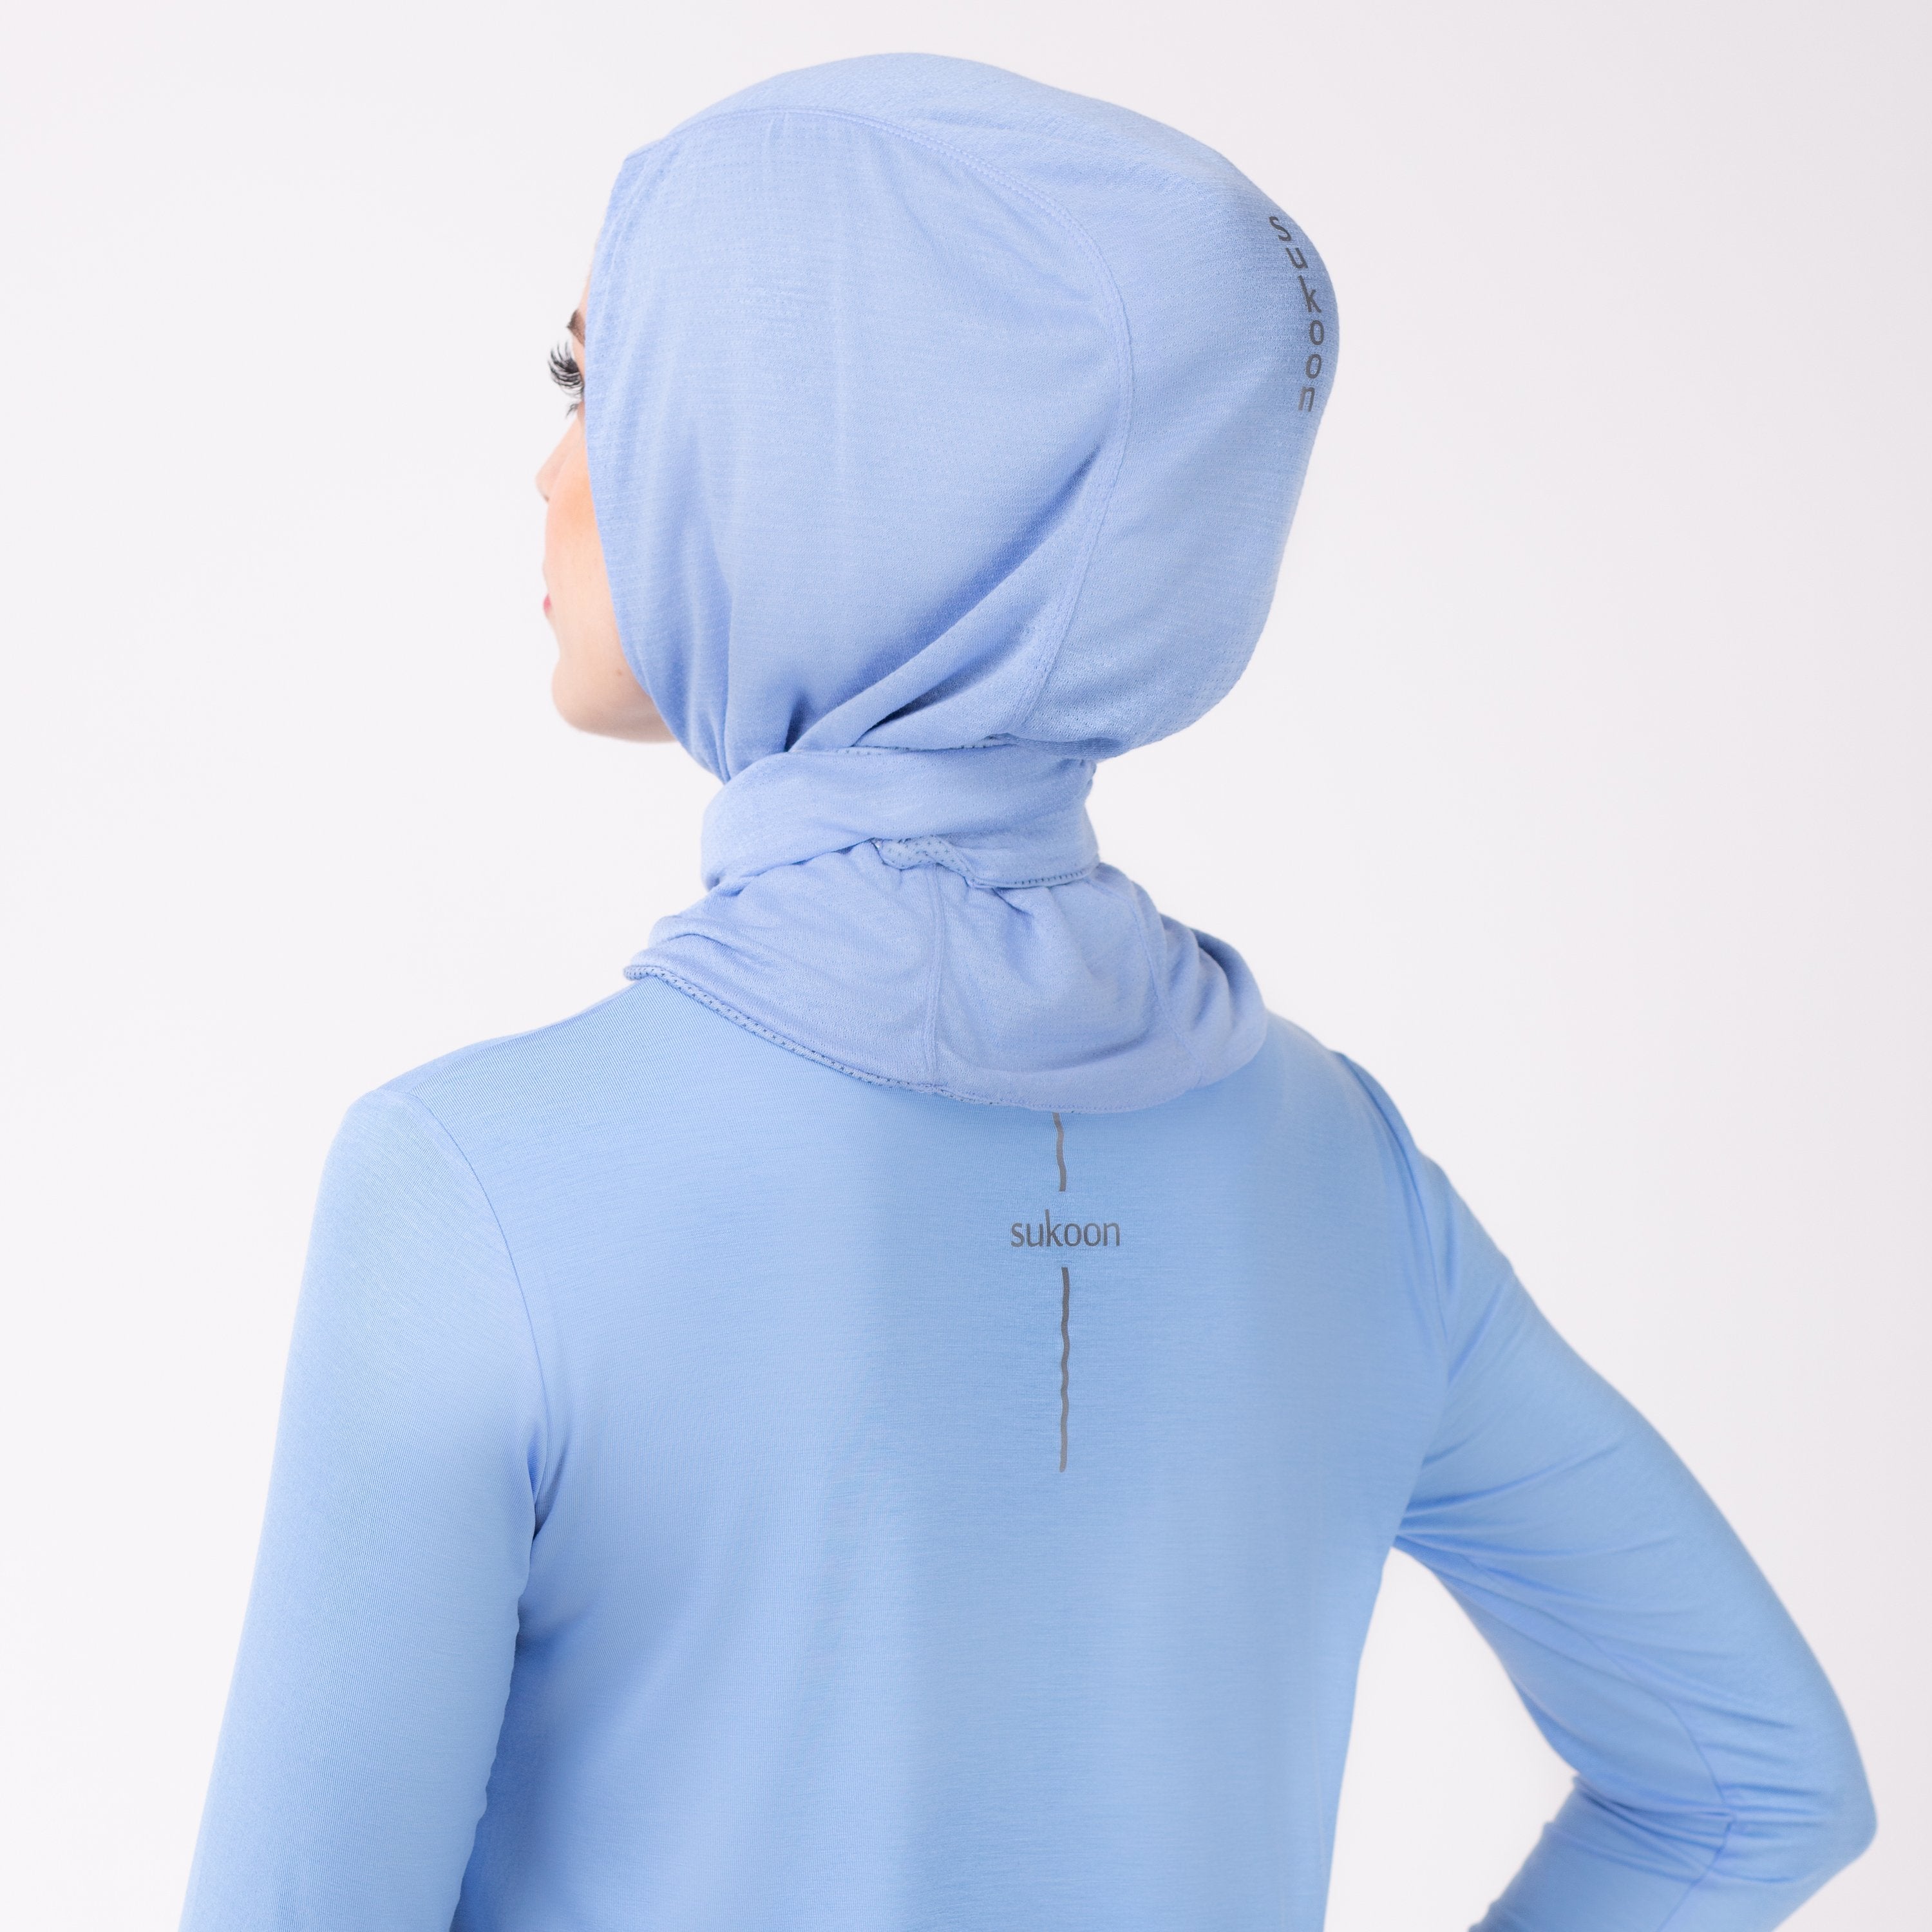 Back detail of a woman in a sky blue shirt with a matching sky blue HAWA hijab.